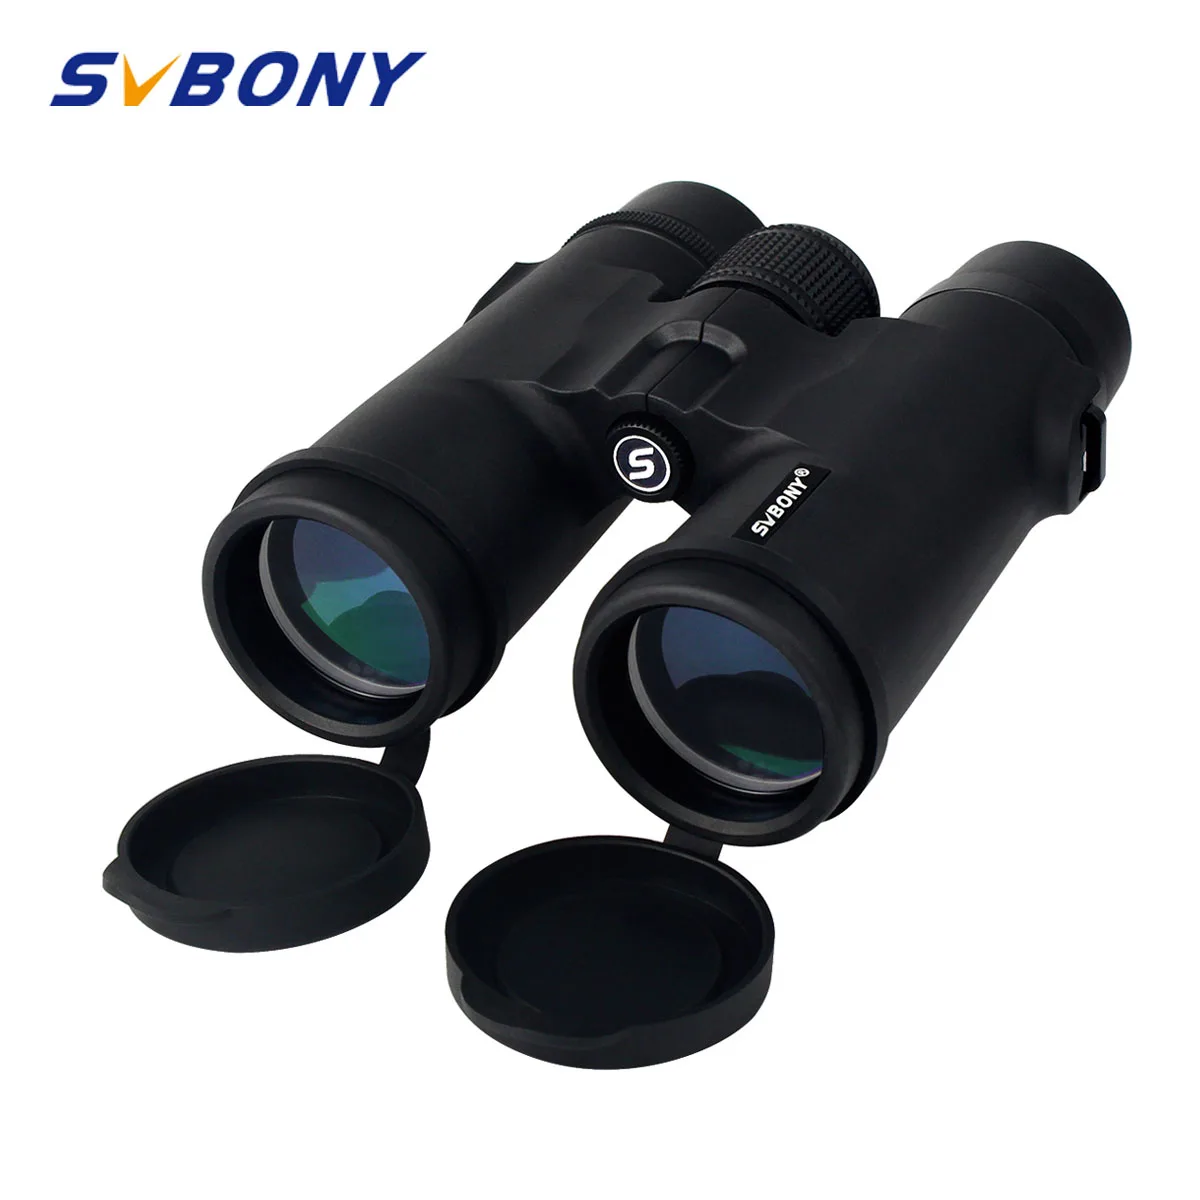 

SVBONY SV-21 Binoculars 8x42 Multi-Coated Roof Prism with Twist-up Outdoor Binoculars for Hunting Bird Watching Camping F9117AB